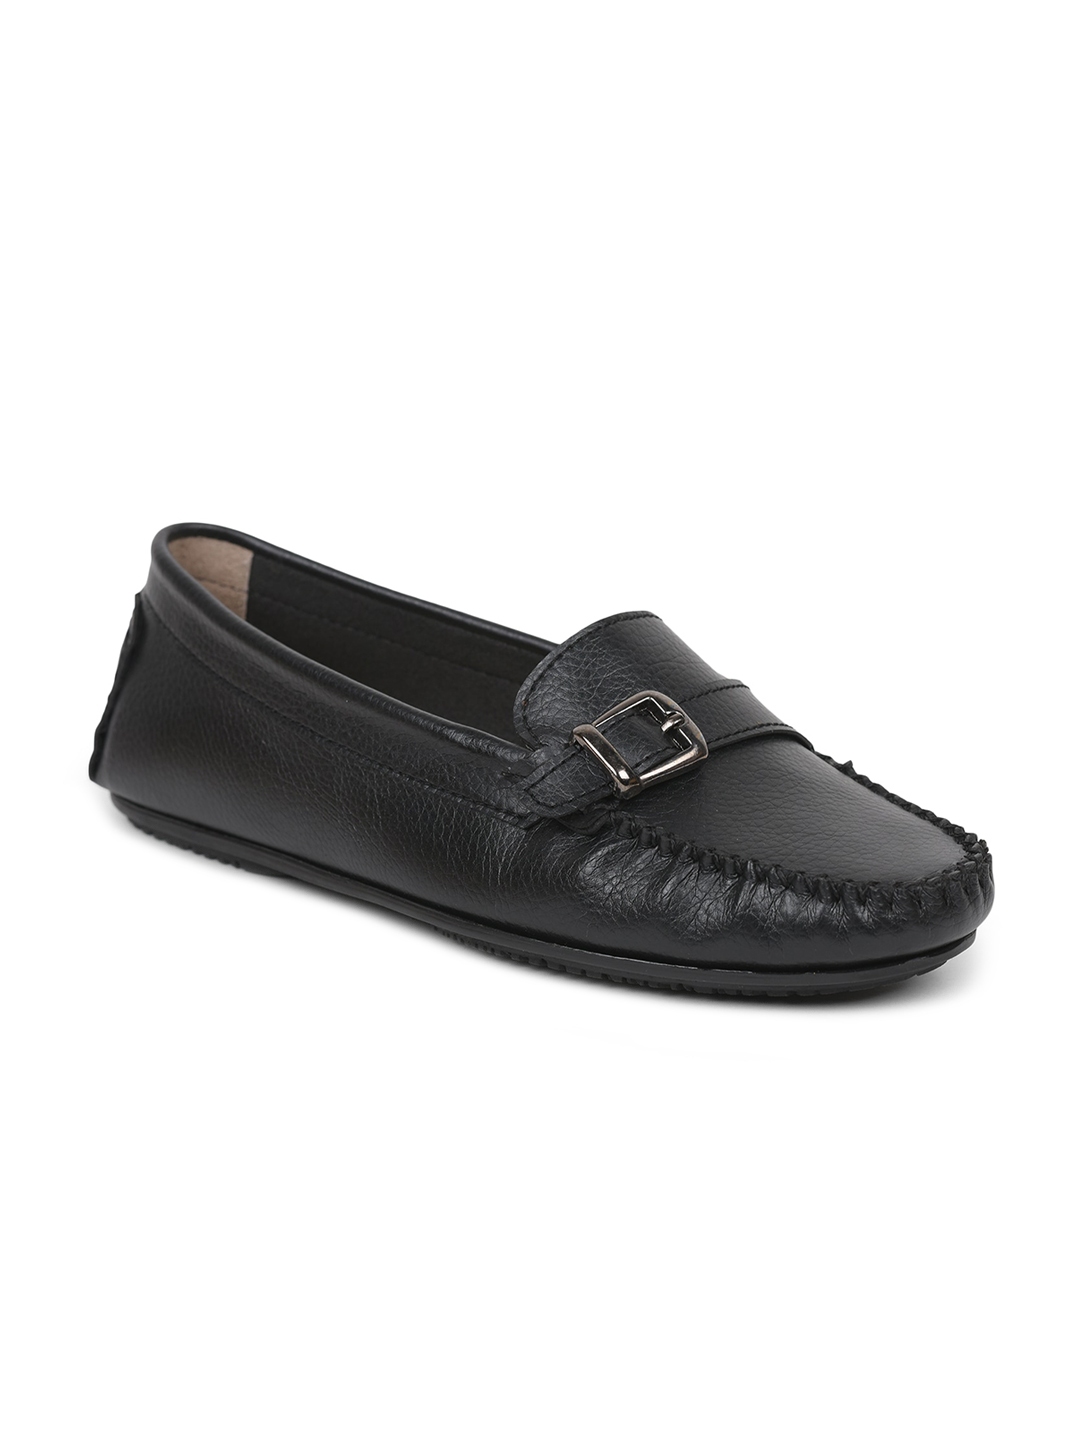 Buy Liberty Women Black Loafers - Casual Shoes for Women 16371856 | Myntra